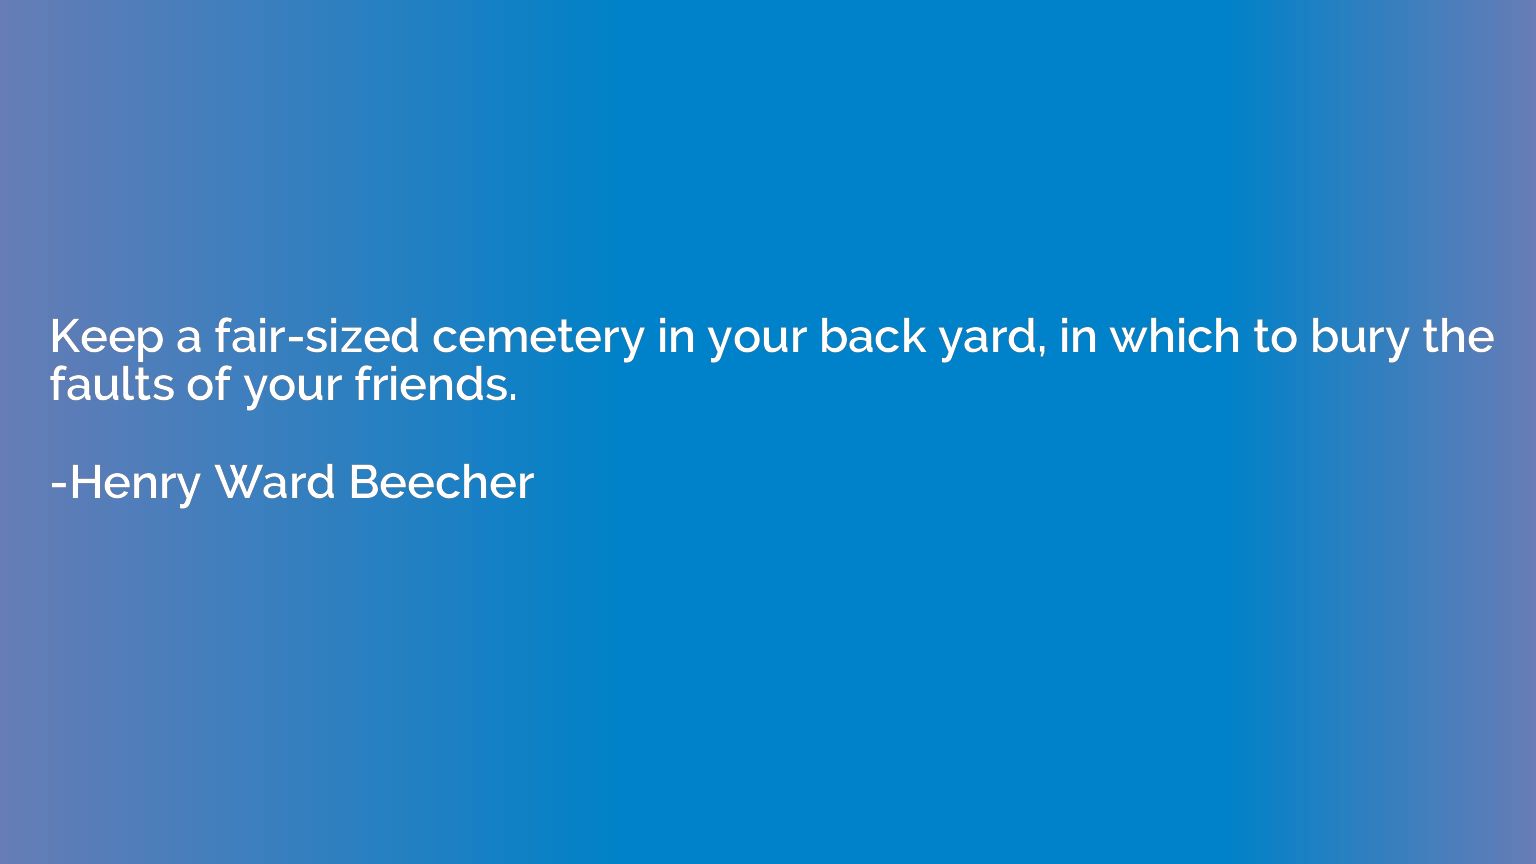 Keep a fair-sized cemetery in your back yard, in which to bu